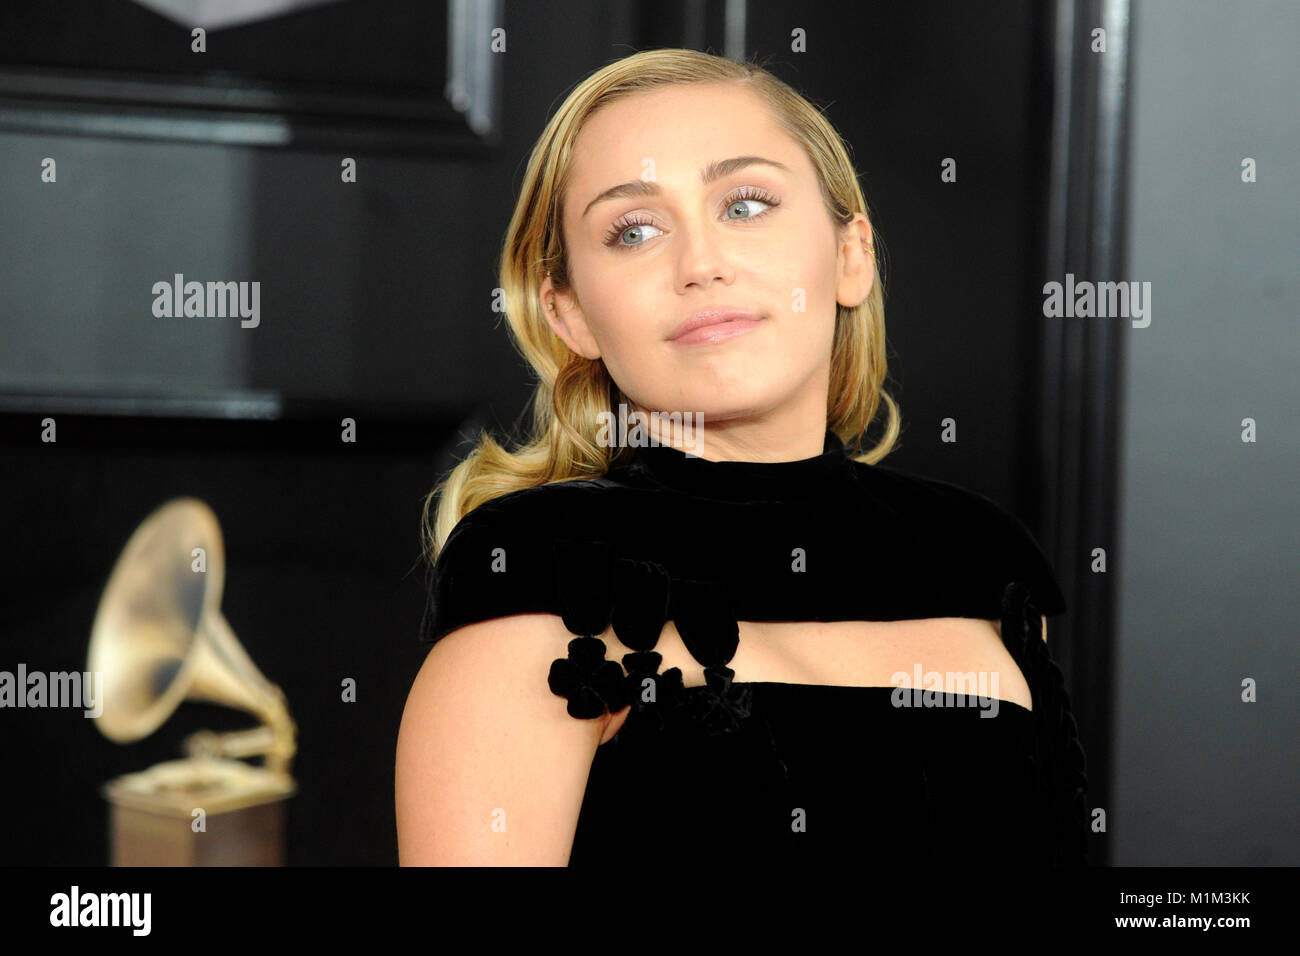 Miley Cyrus attends the 60th Annual Grammy Awards 2018 at Madison Square Garden on January 28, 2018 in New York City. Stock Photo